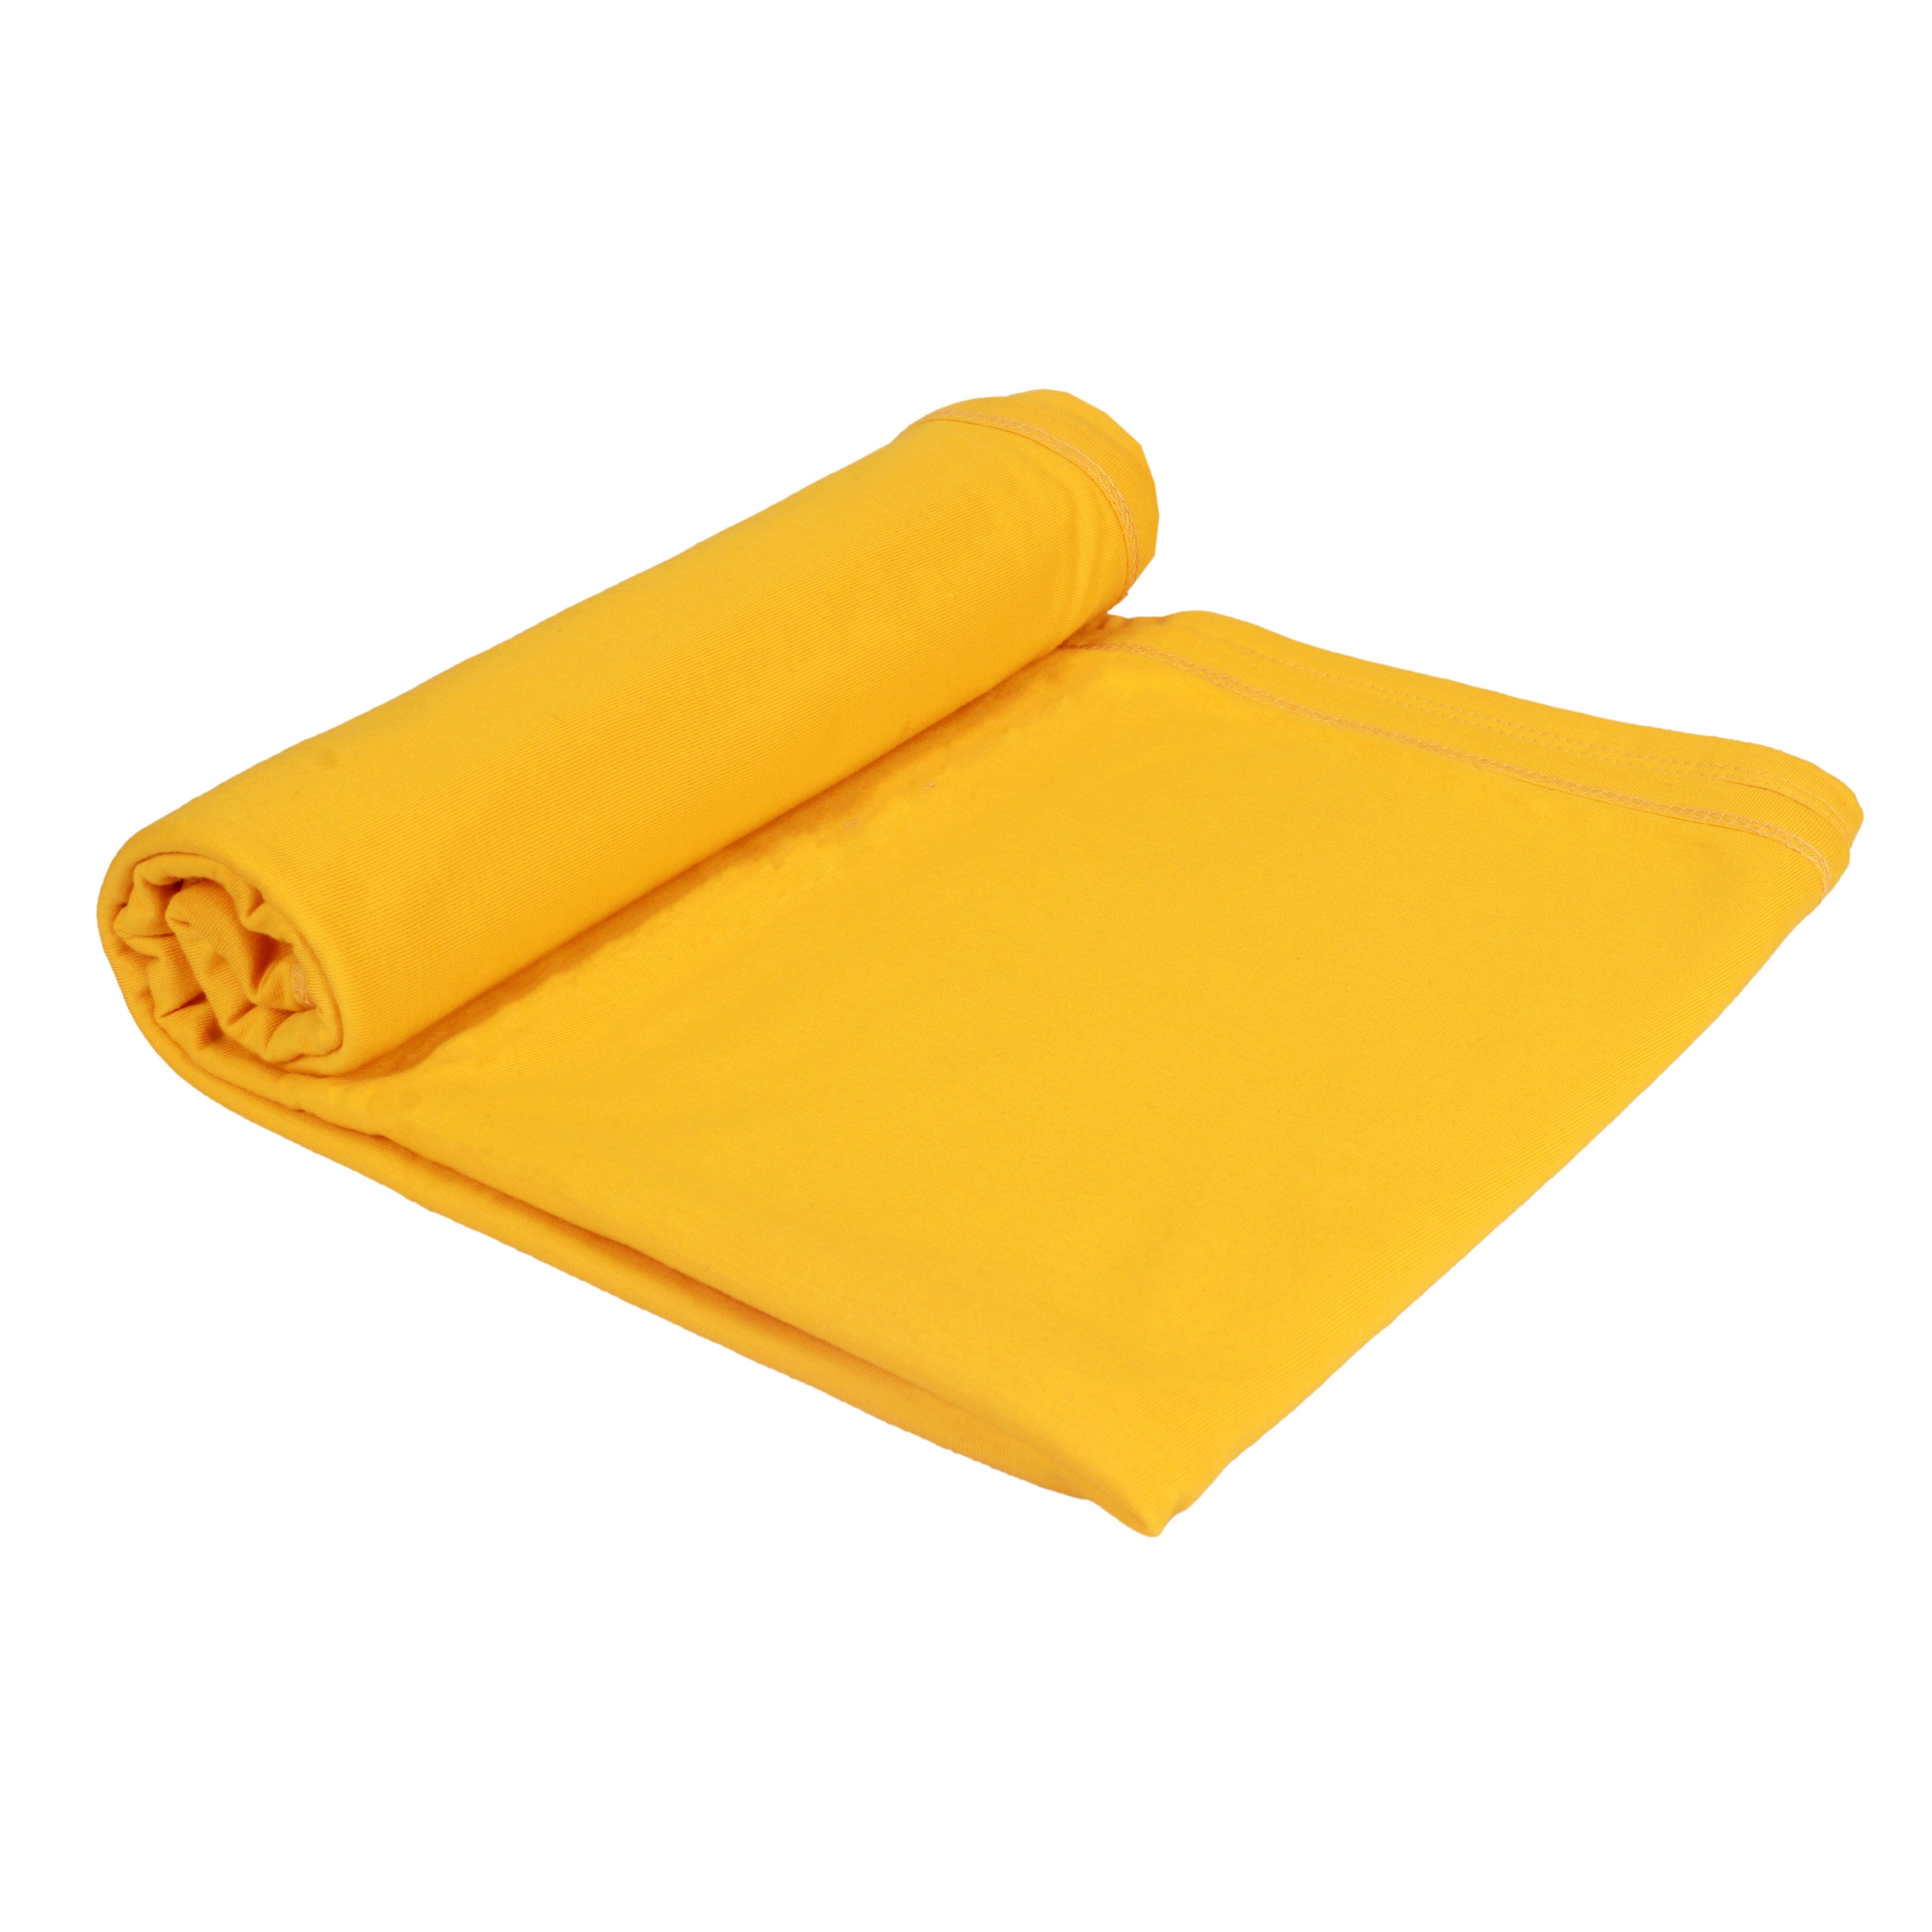 Little By Little 100% Anti Viral, Cotton, Reusable, Anti bacterial & Water Repellent Baby Swaddle - Yellow